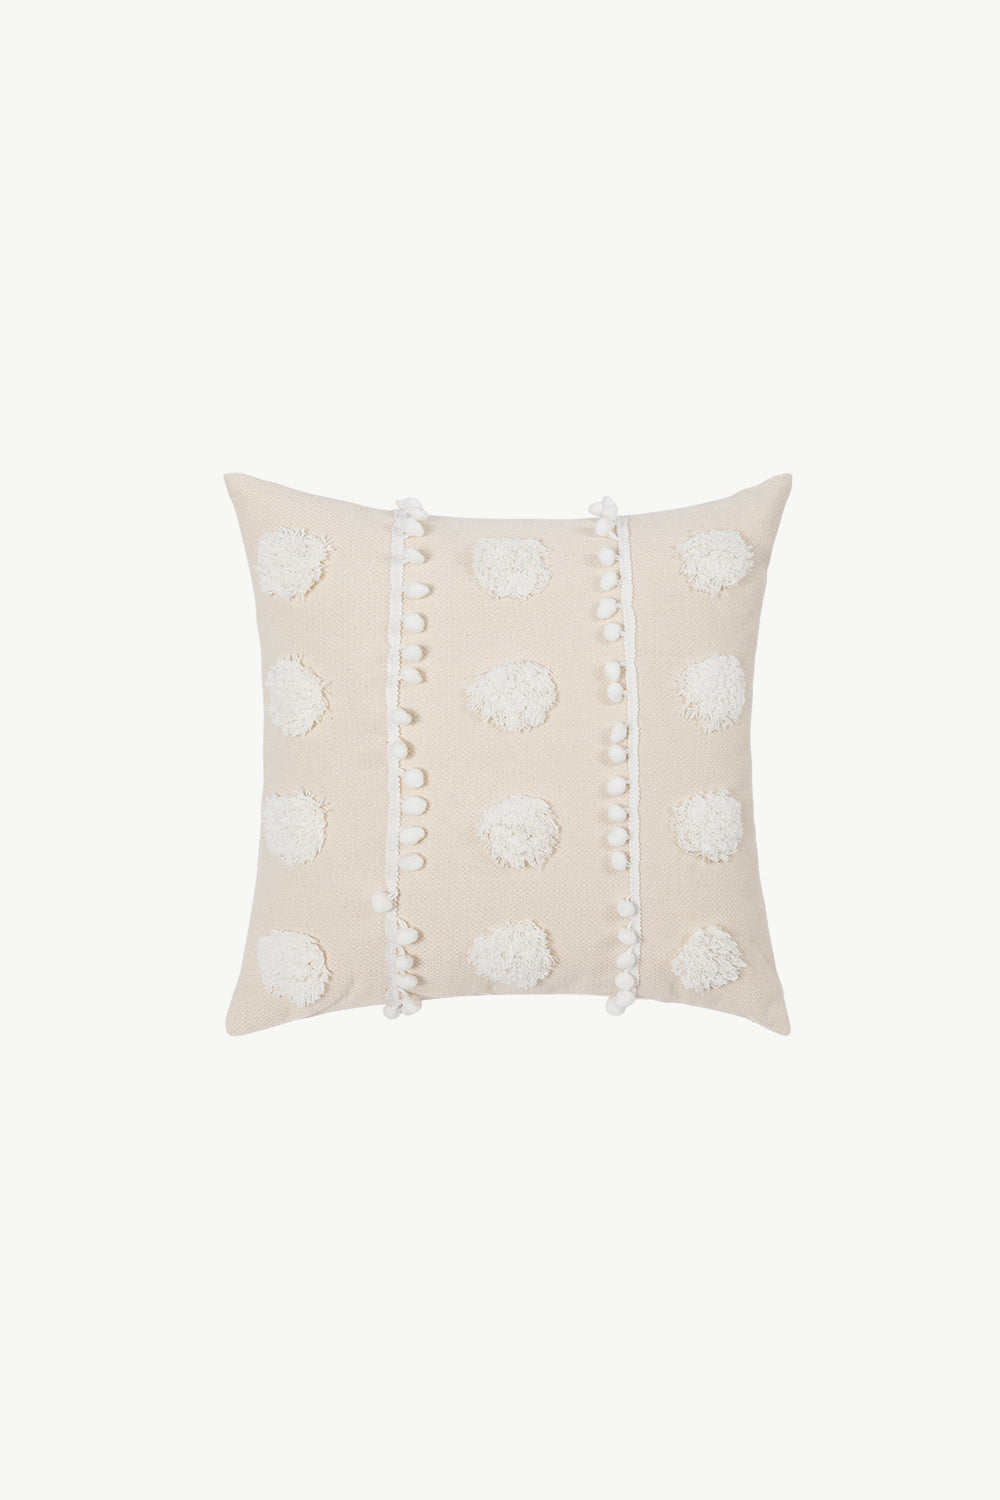 Fringe Decorative Throw Pillow Covers (Neutral Textures)